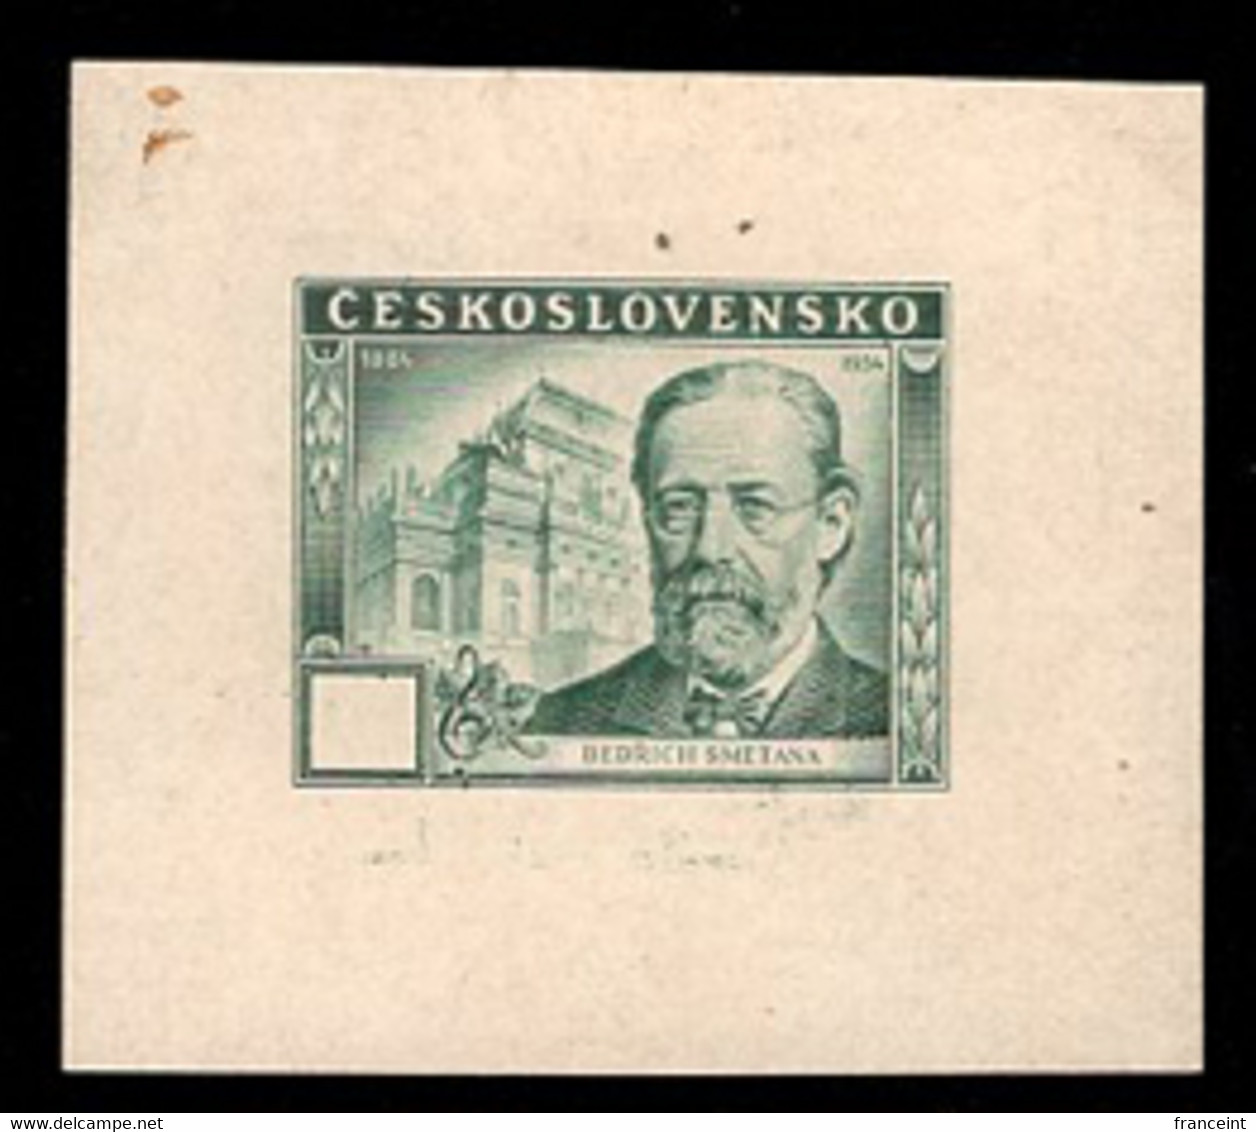 CZECHOSLOVAKIA(1949) Bedrich Smetana. Die Proof In Green Without Value In Tablet. Scott No 386. Yvert No 506. - Prove E Ristampe